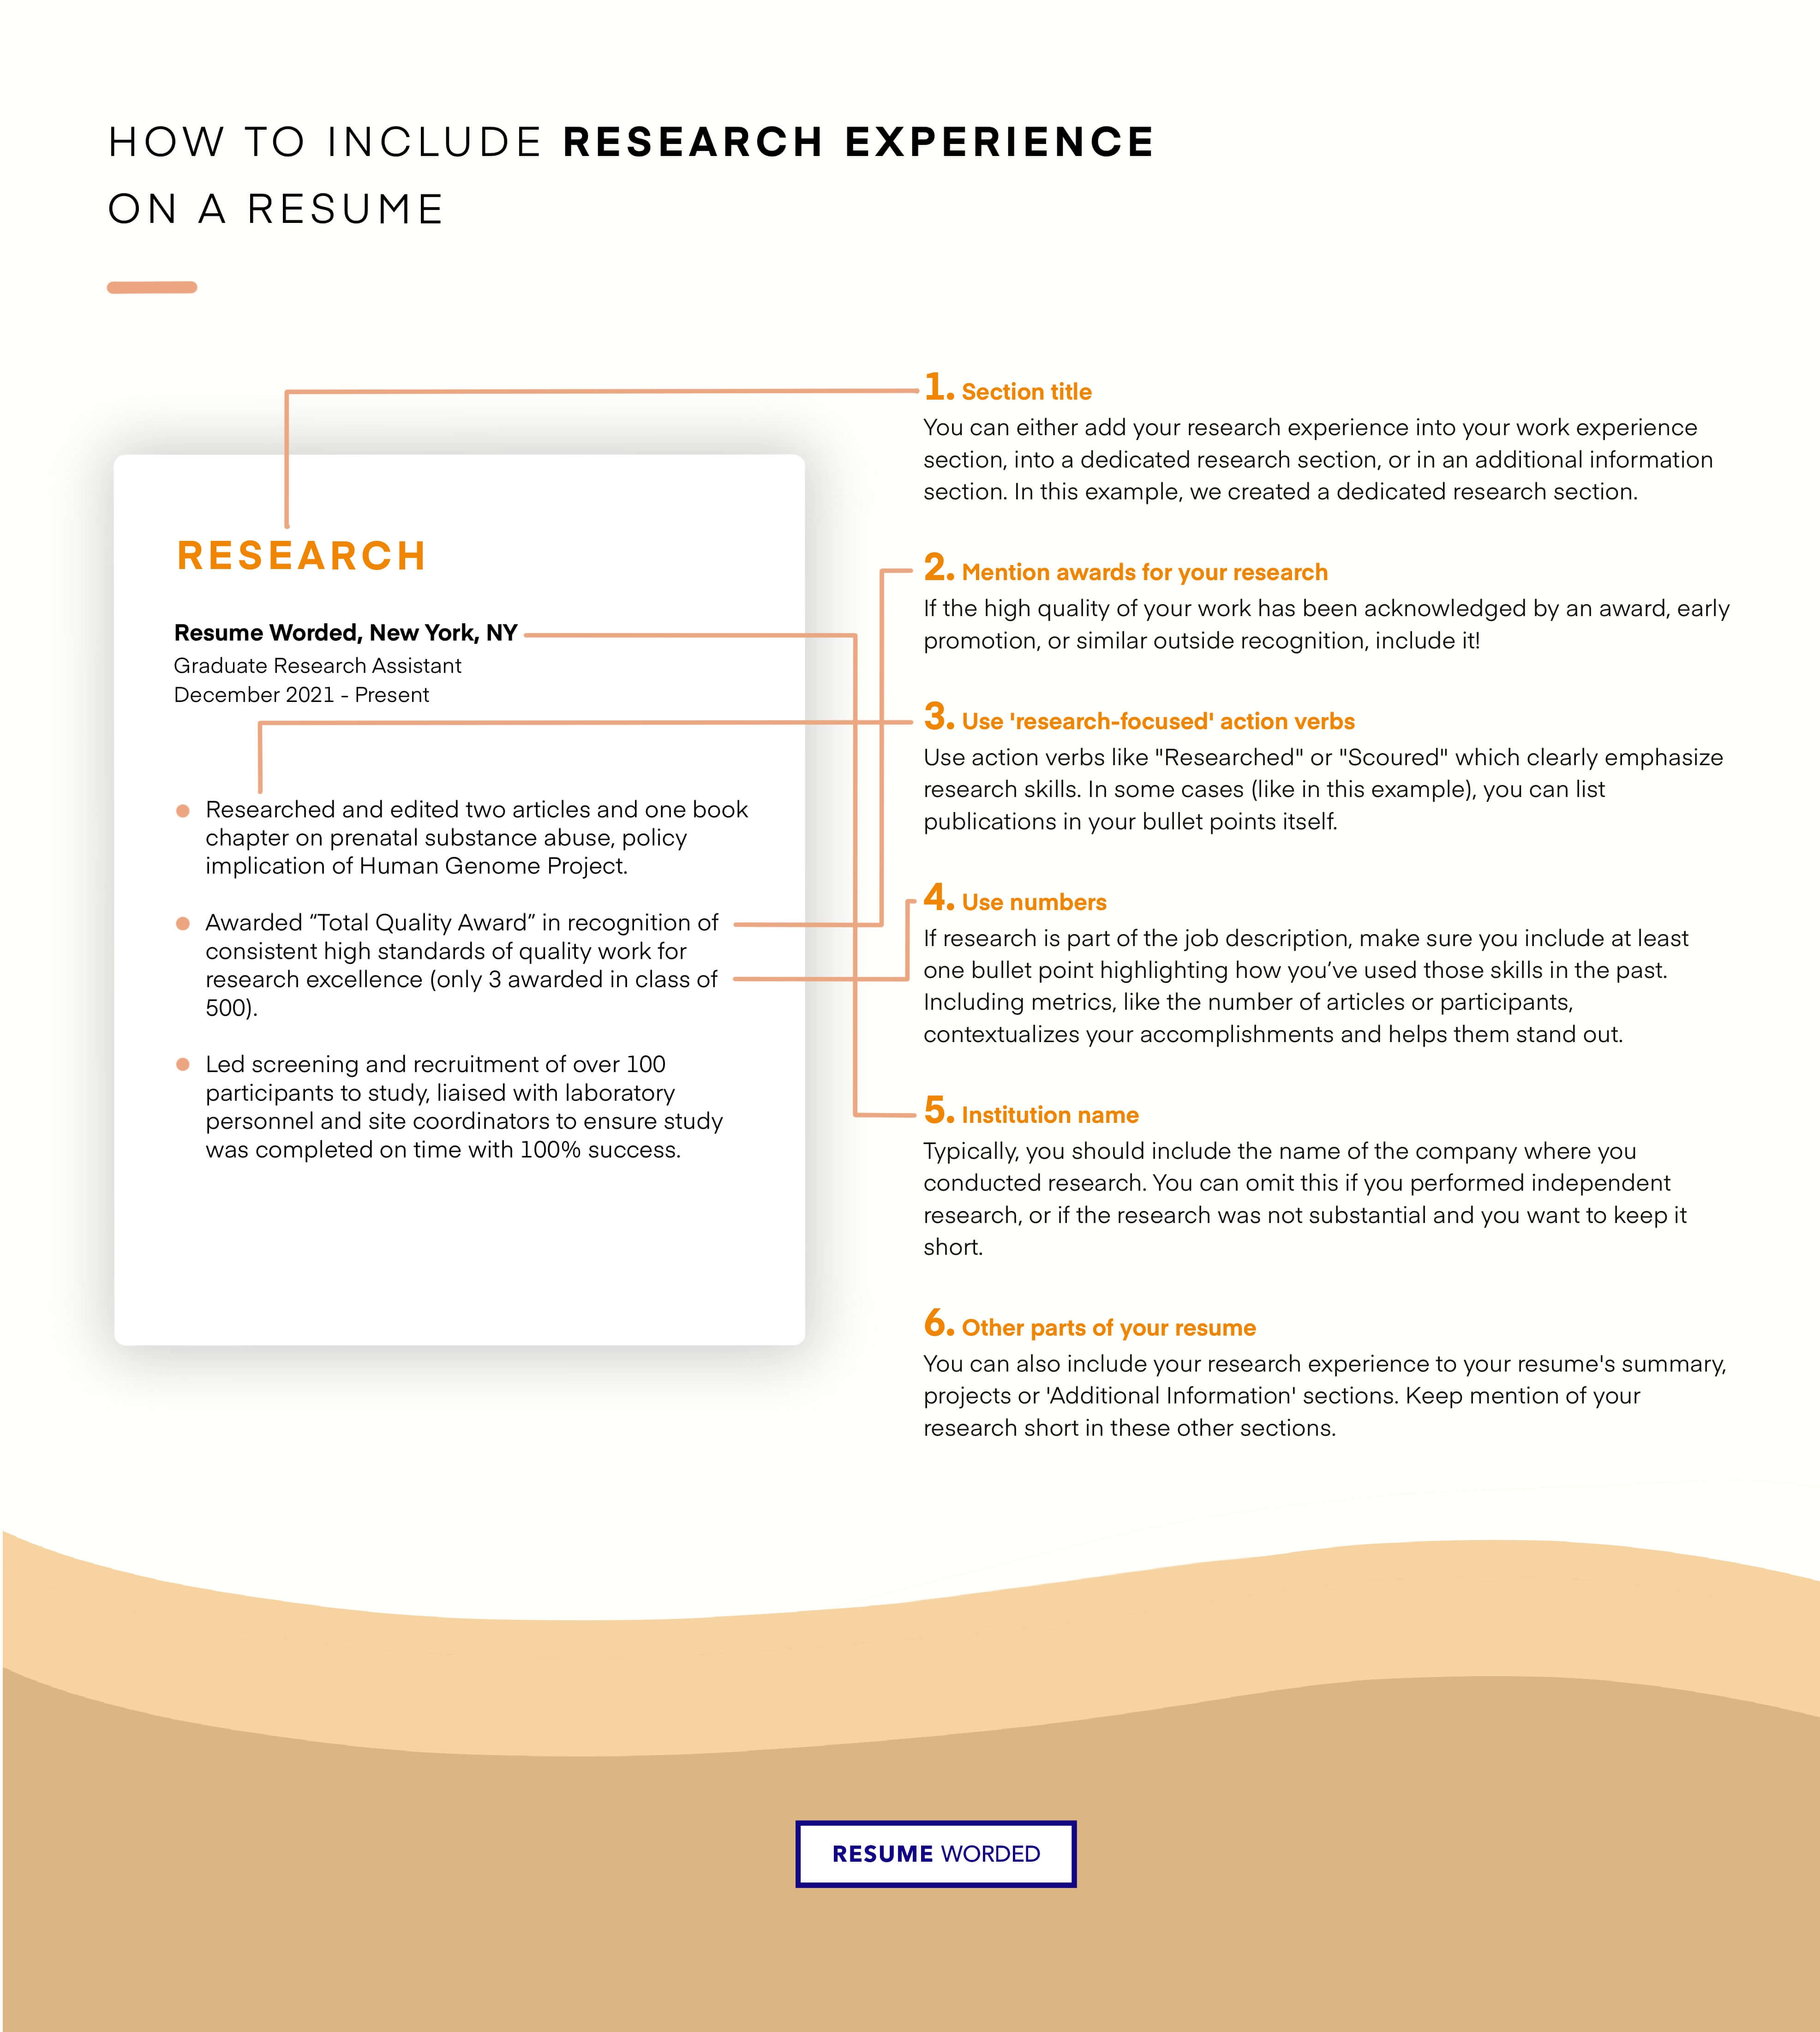 Apply to research assistant positions that intersect with your field of study - Undergraduate Research Assistant Resume